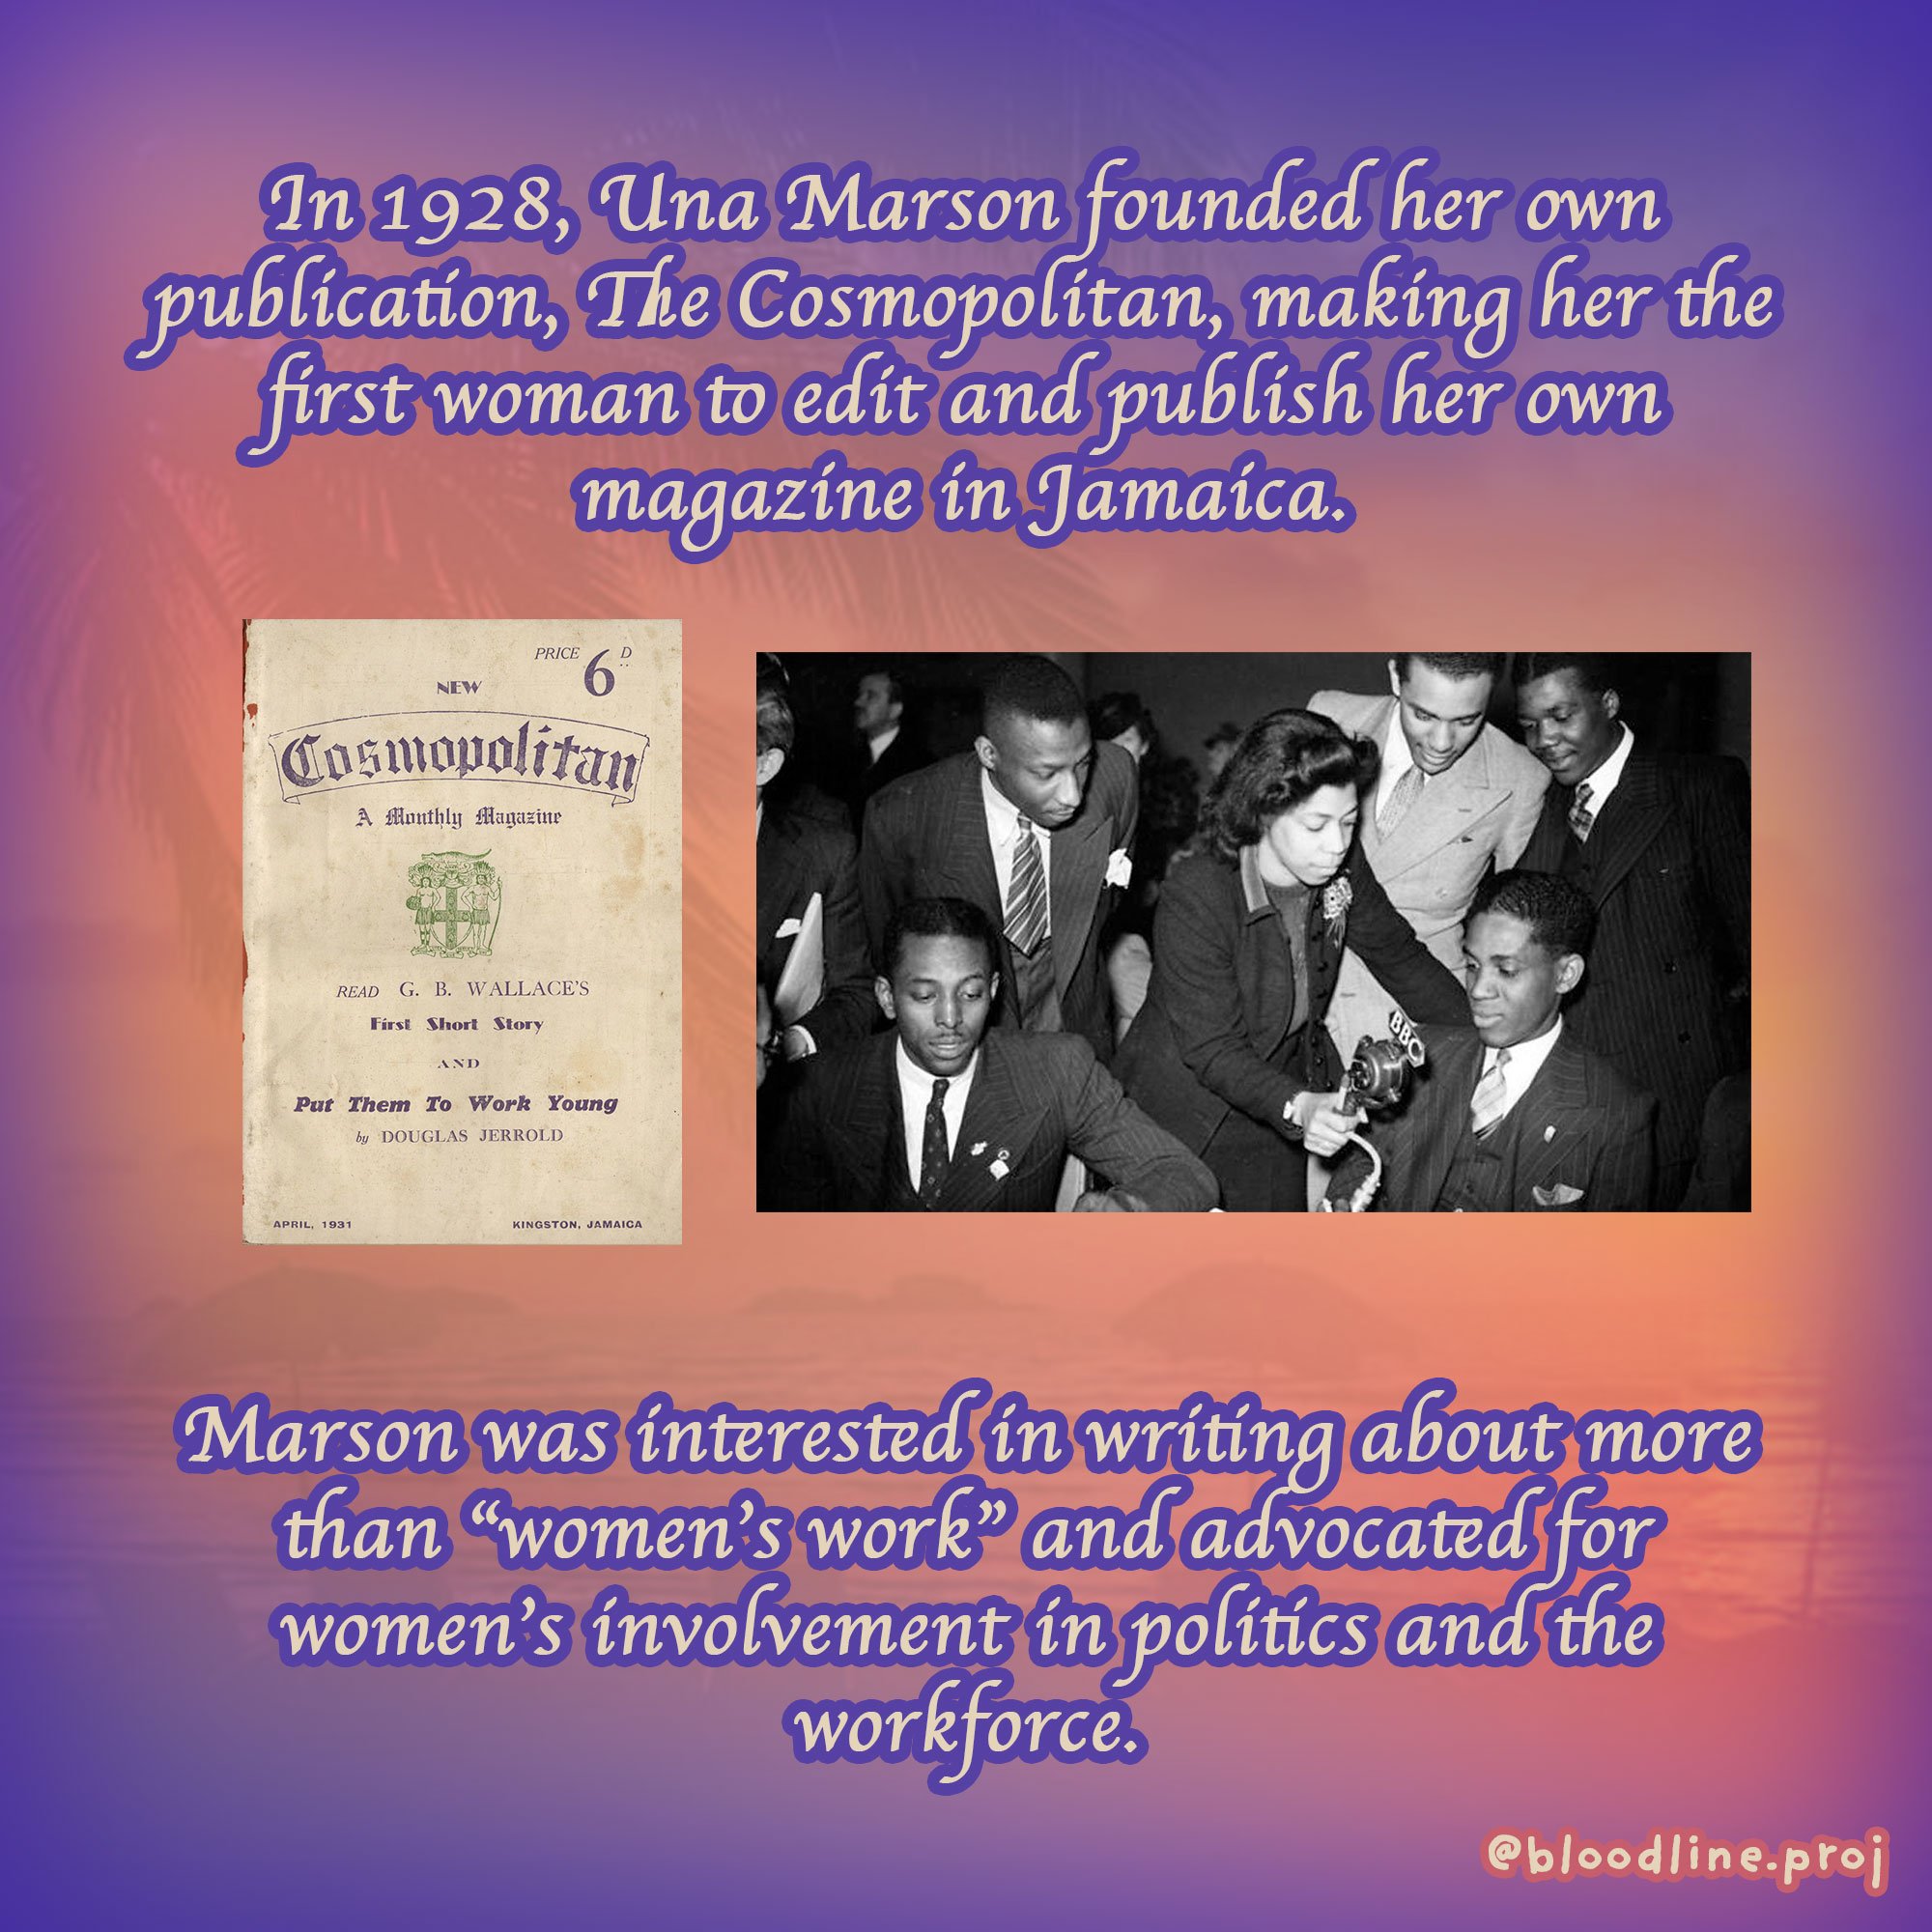  In 1928, Una Marson founded her own publication,  The Cosmopolitan , making her the  first  woman to edit and publish her own magazine in Jamaica. Marson was interested in writing about more than “women’s work” and advocated for women’s involvement 